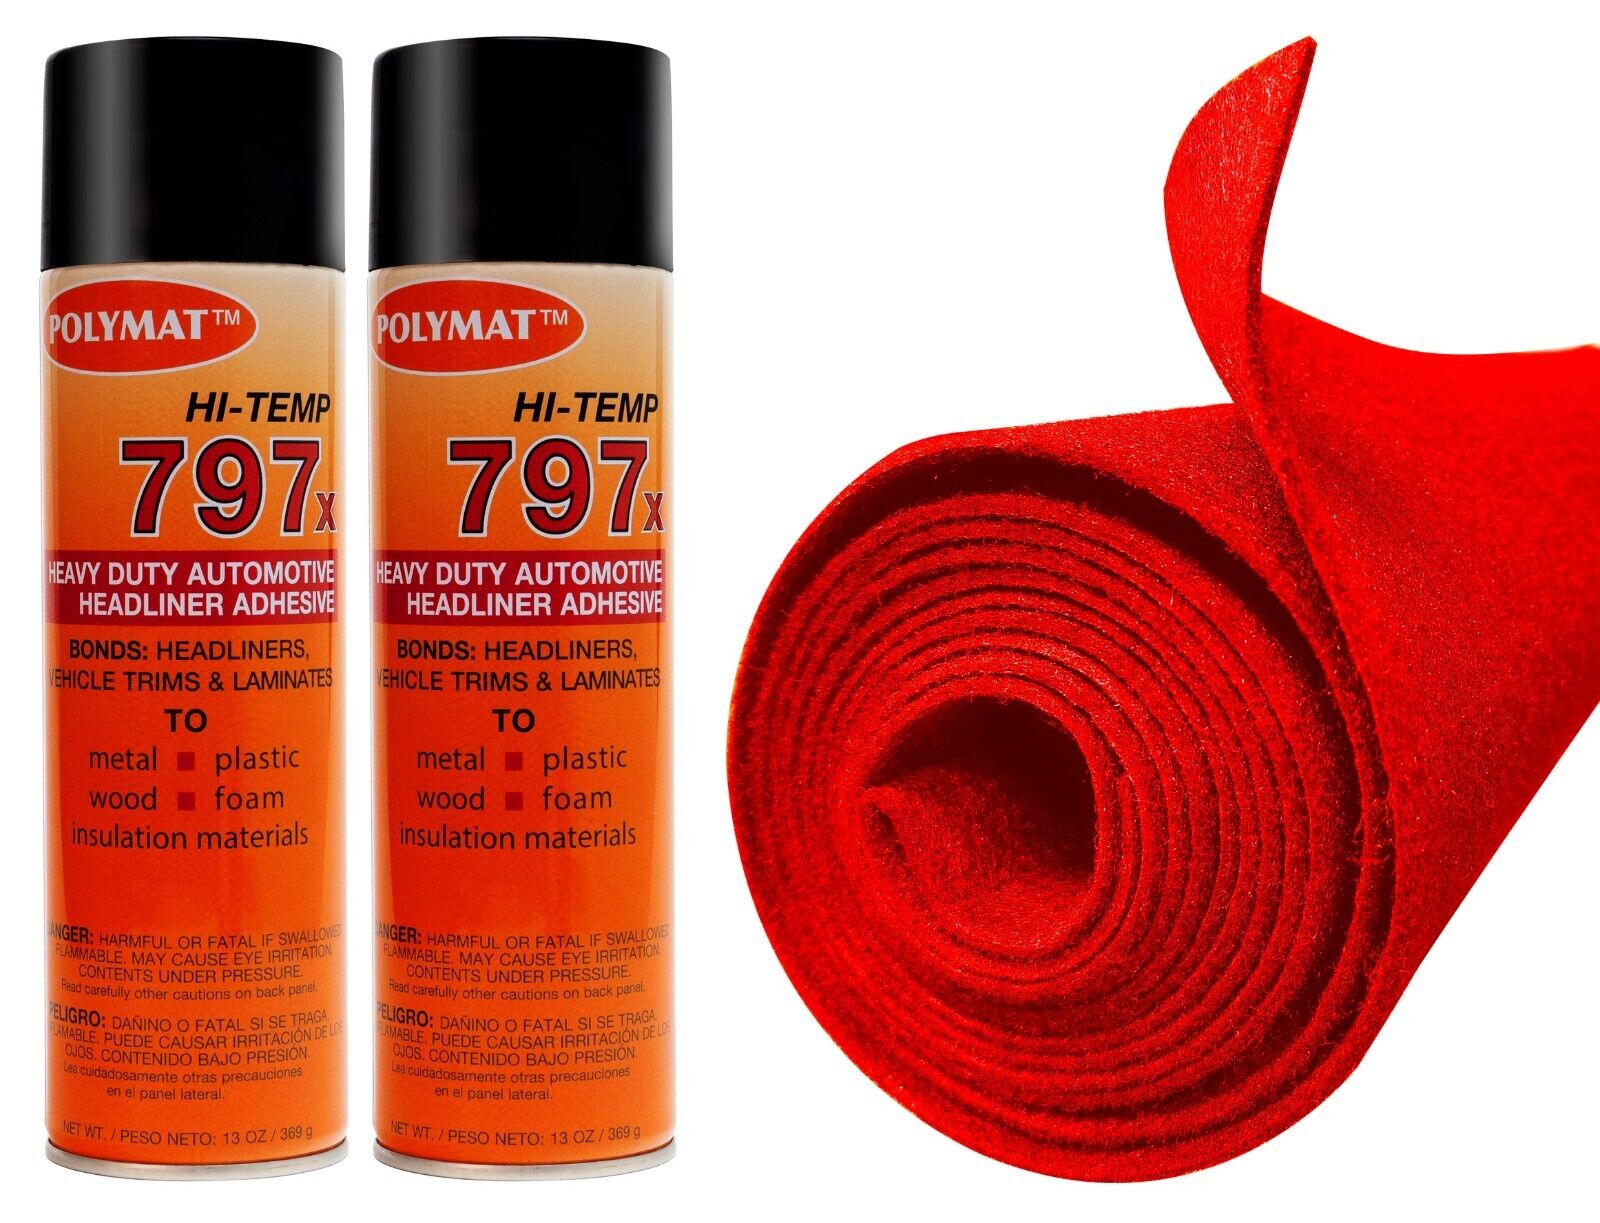 12FTx3.75FT POLYMAT RED S35+2-797 HI TEMP ADHESIVE For CAR TRUCK BOAT HEADLINER